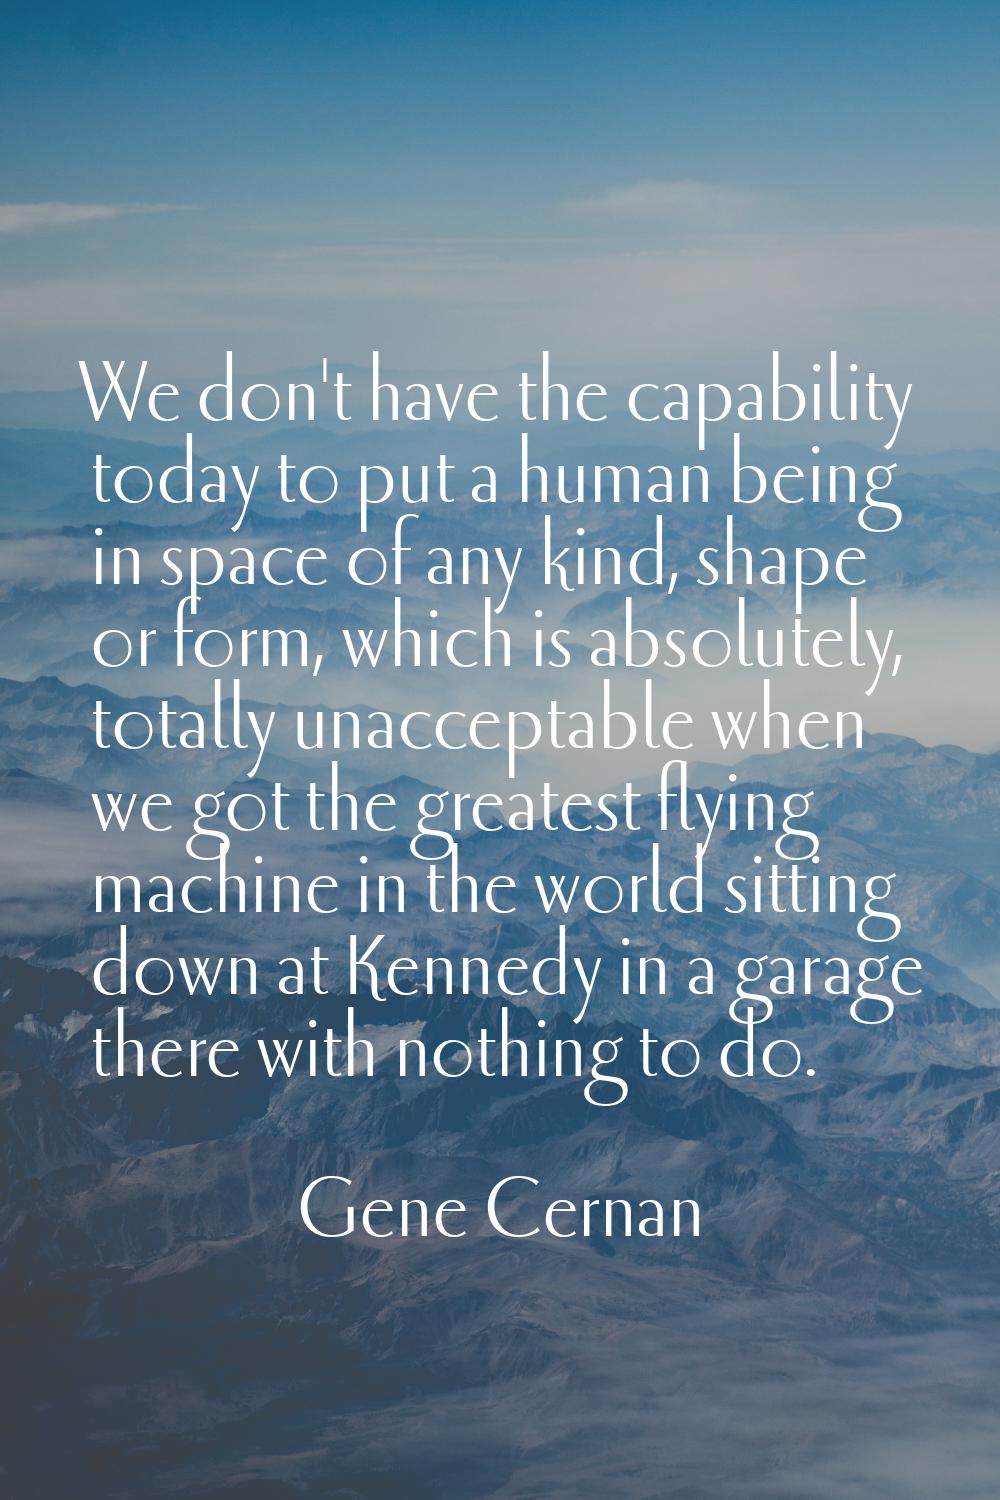 We don't have the capability today to put a human being in space of any kind, shape or form, which 